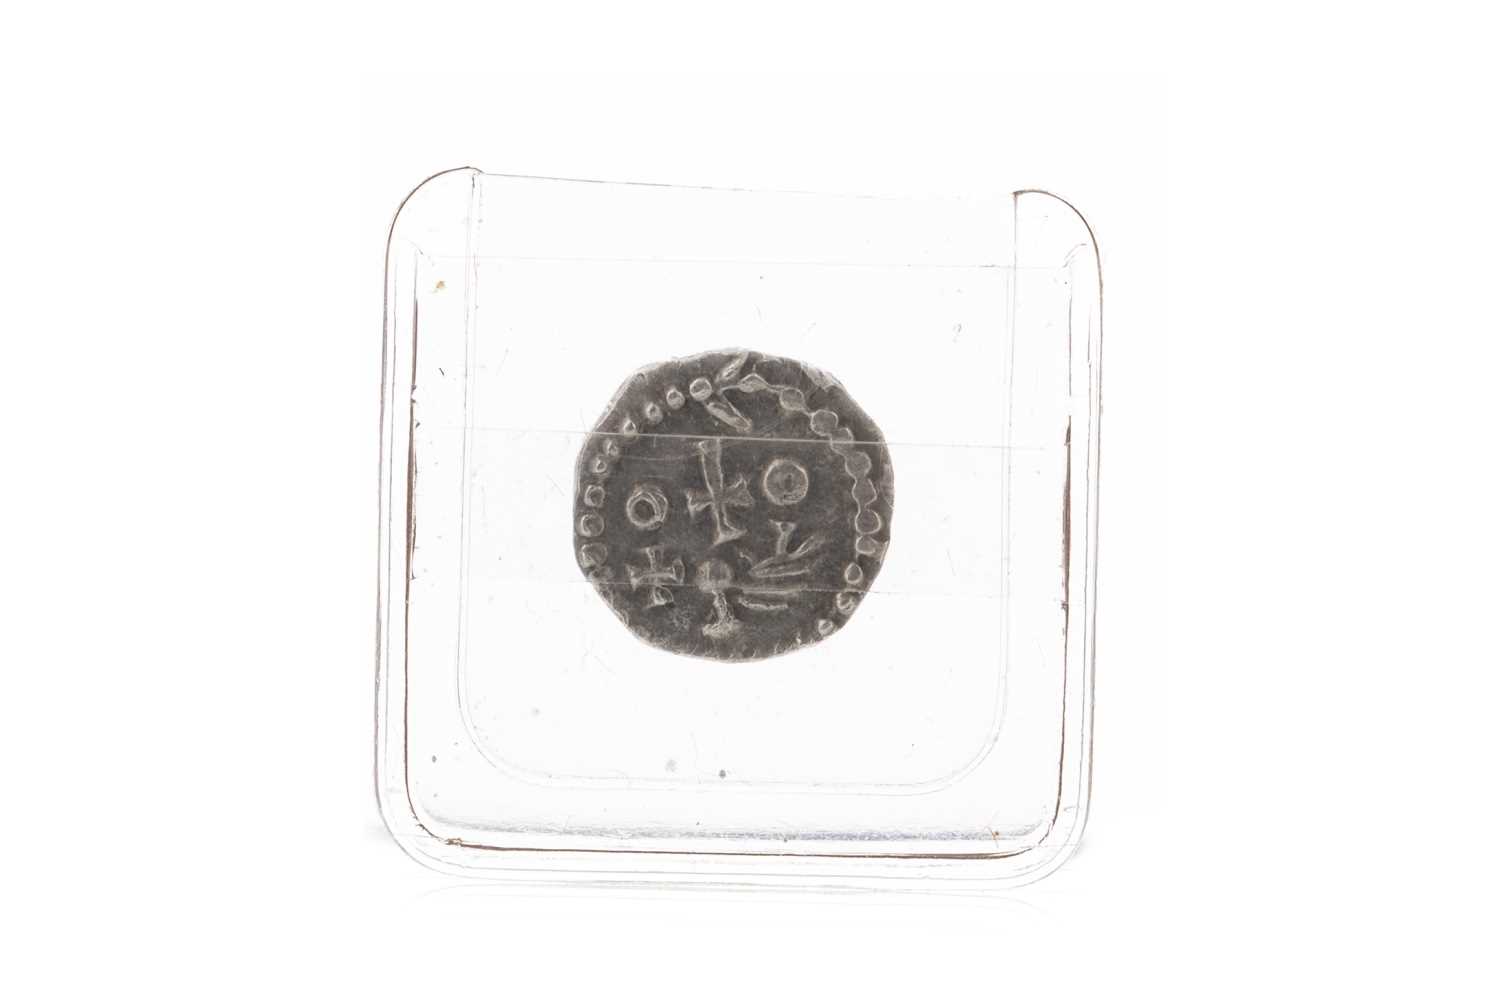 Lot 106 - ANGLO SAXON PERIOD (600 - 775) SCEAT